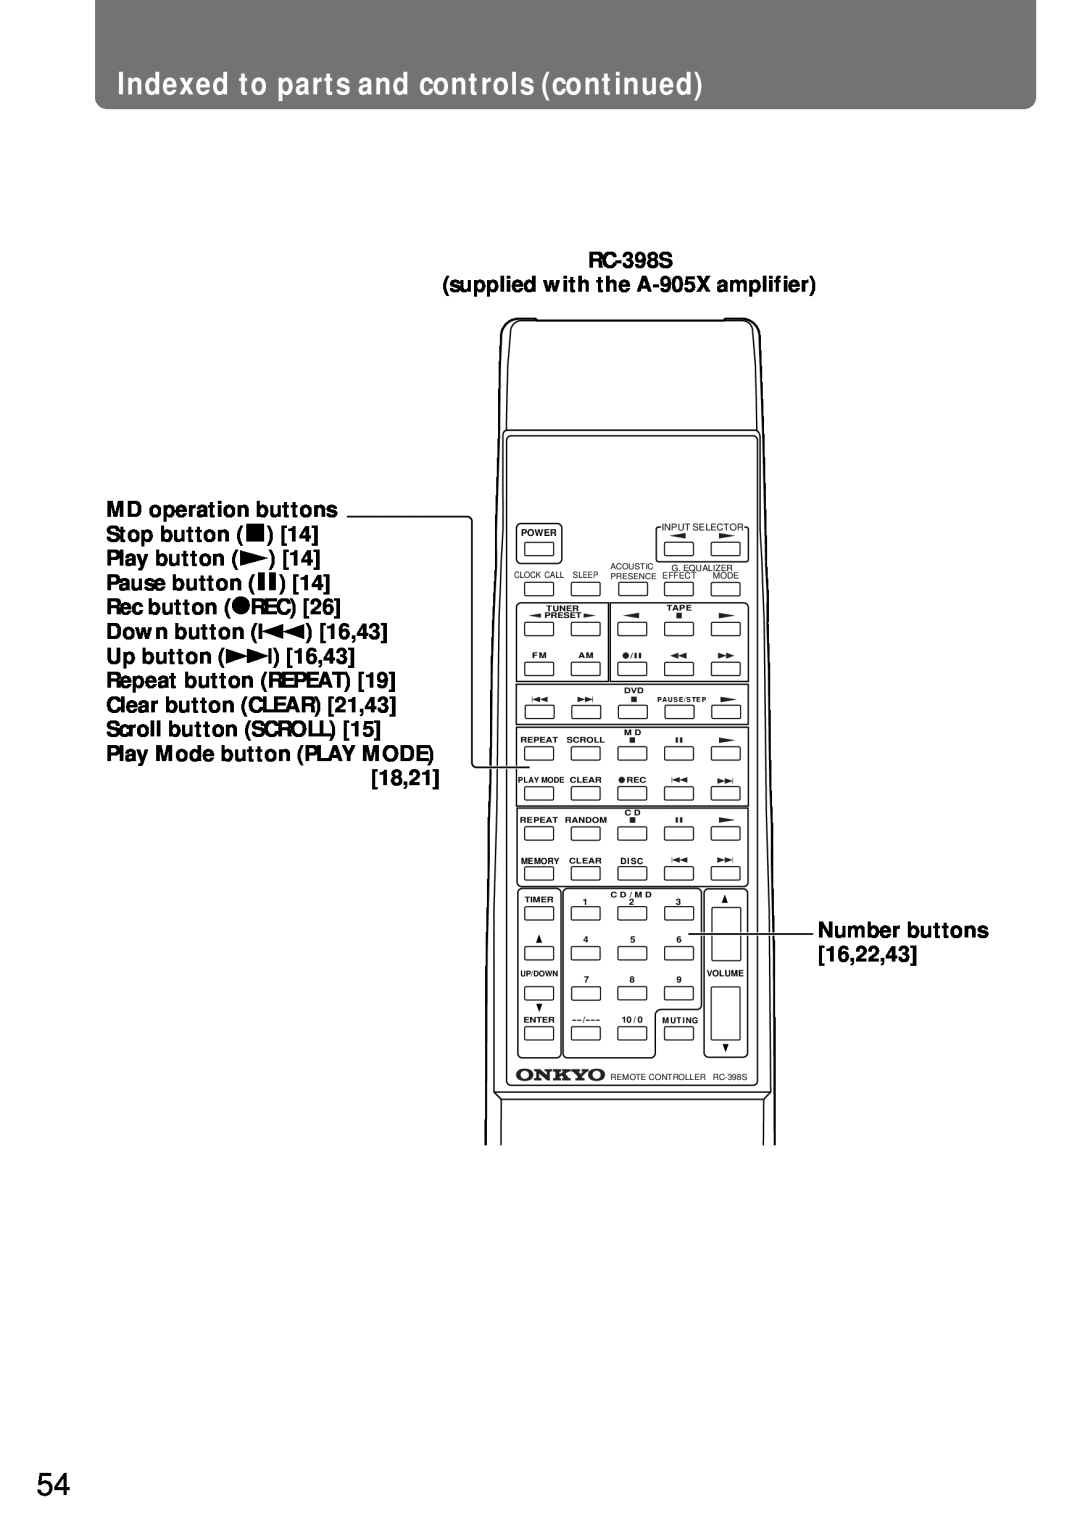 Onkyo MD-105X manual RC-398S, Indexed to parts and controls continued 